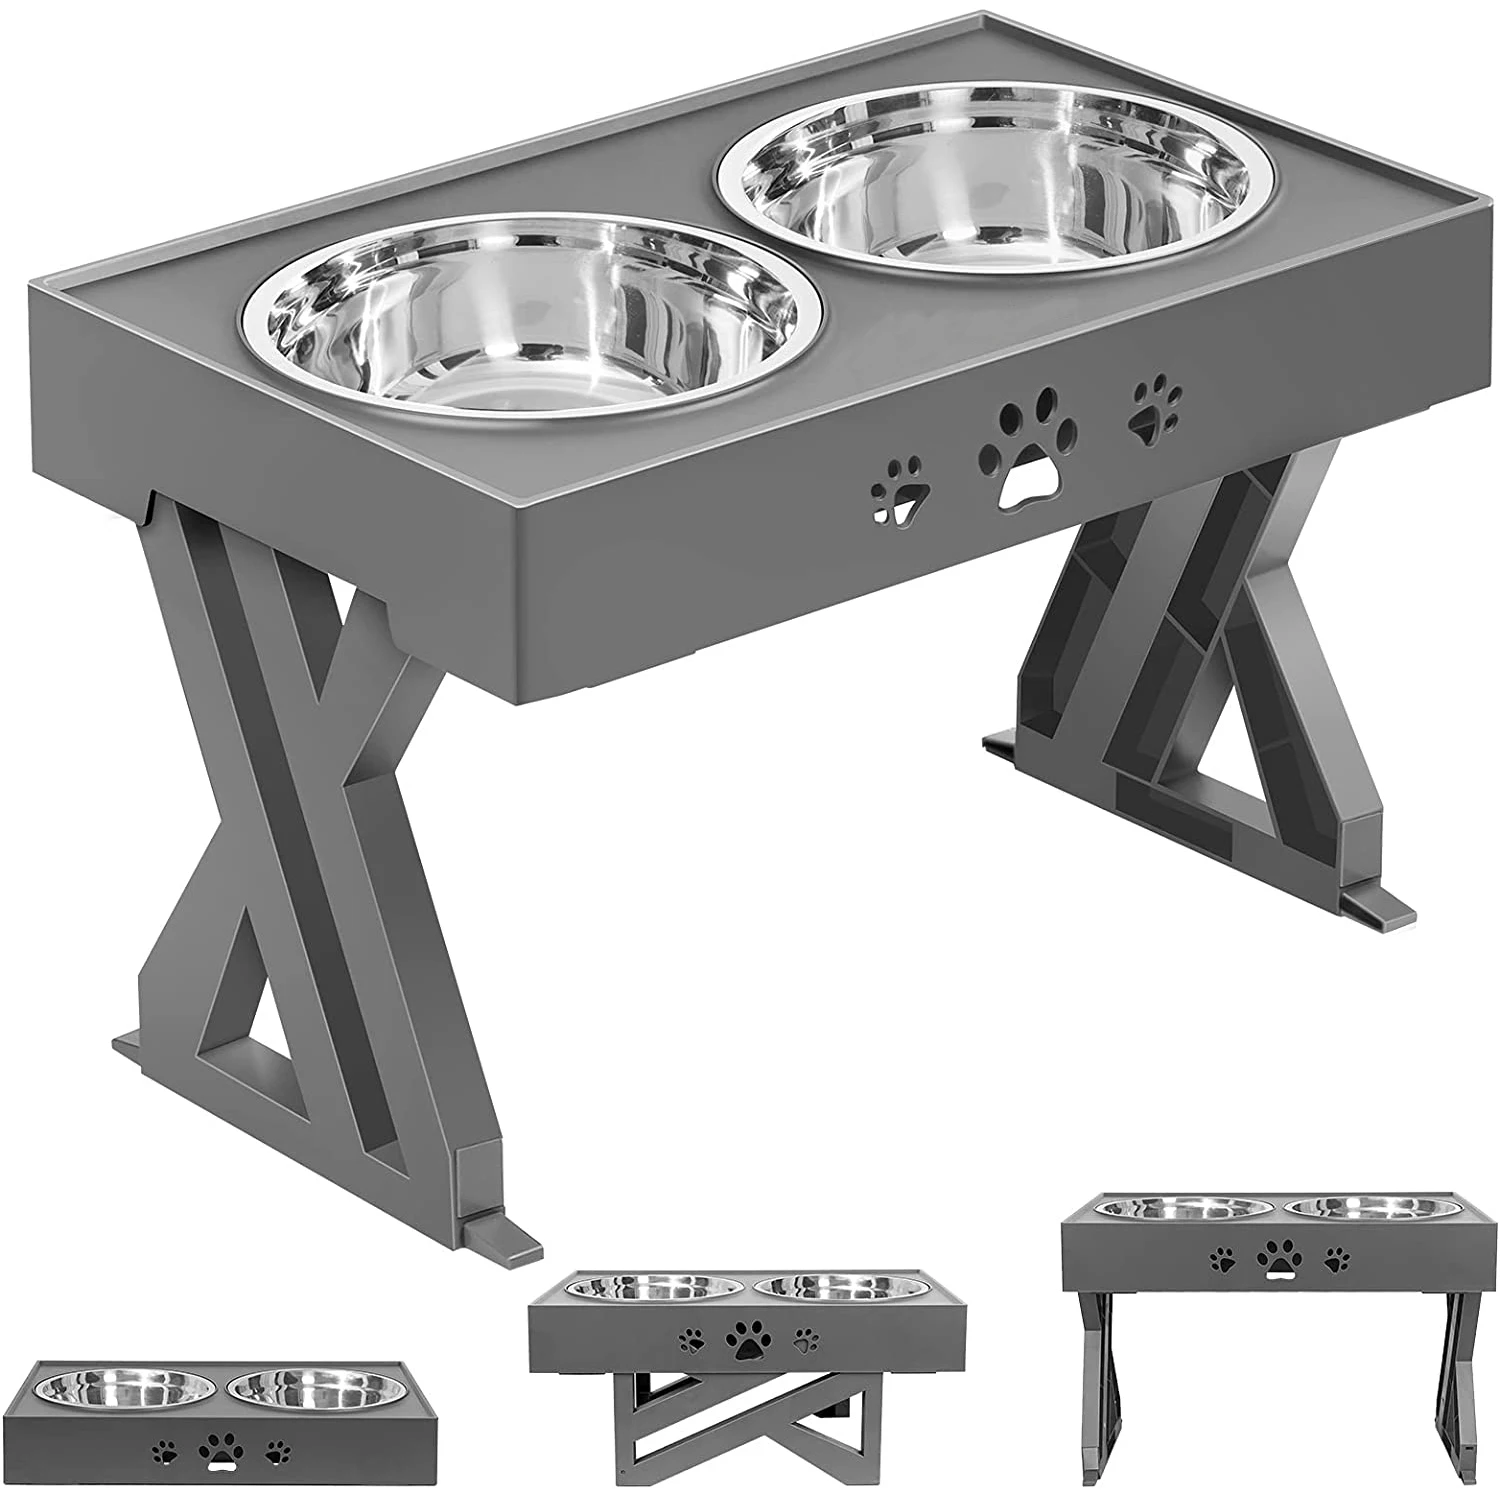 

New Design Adjustable Elevated Dog Bowl Table,High Dog Food Bowl,Double Adjustable Elevated Raised Luxury Pet Cat Dog Bowl Stand